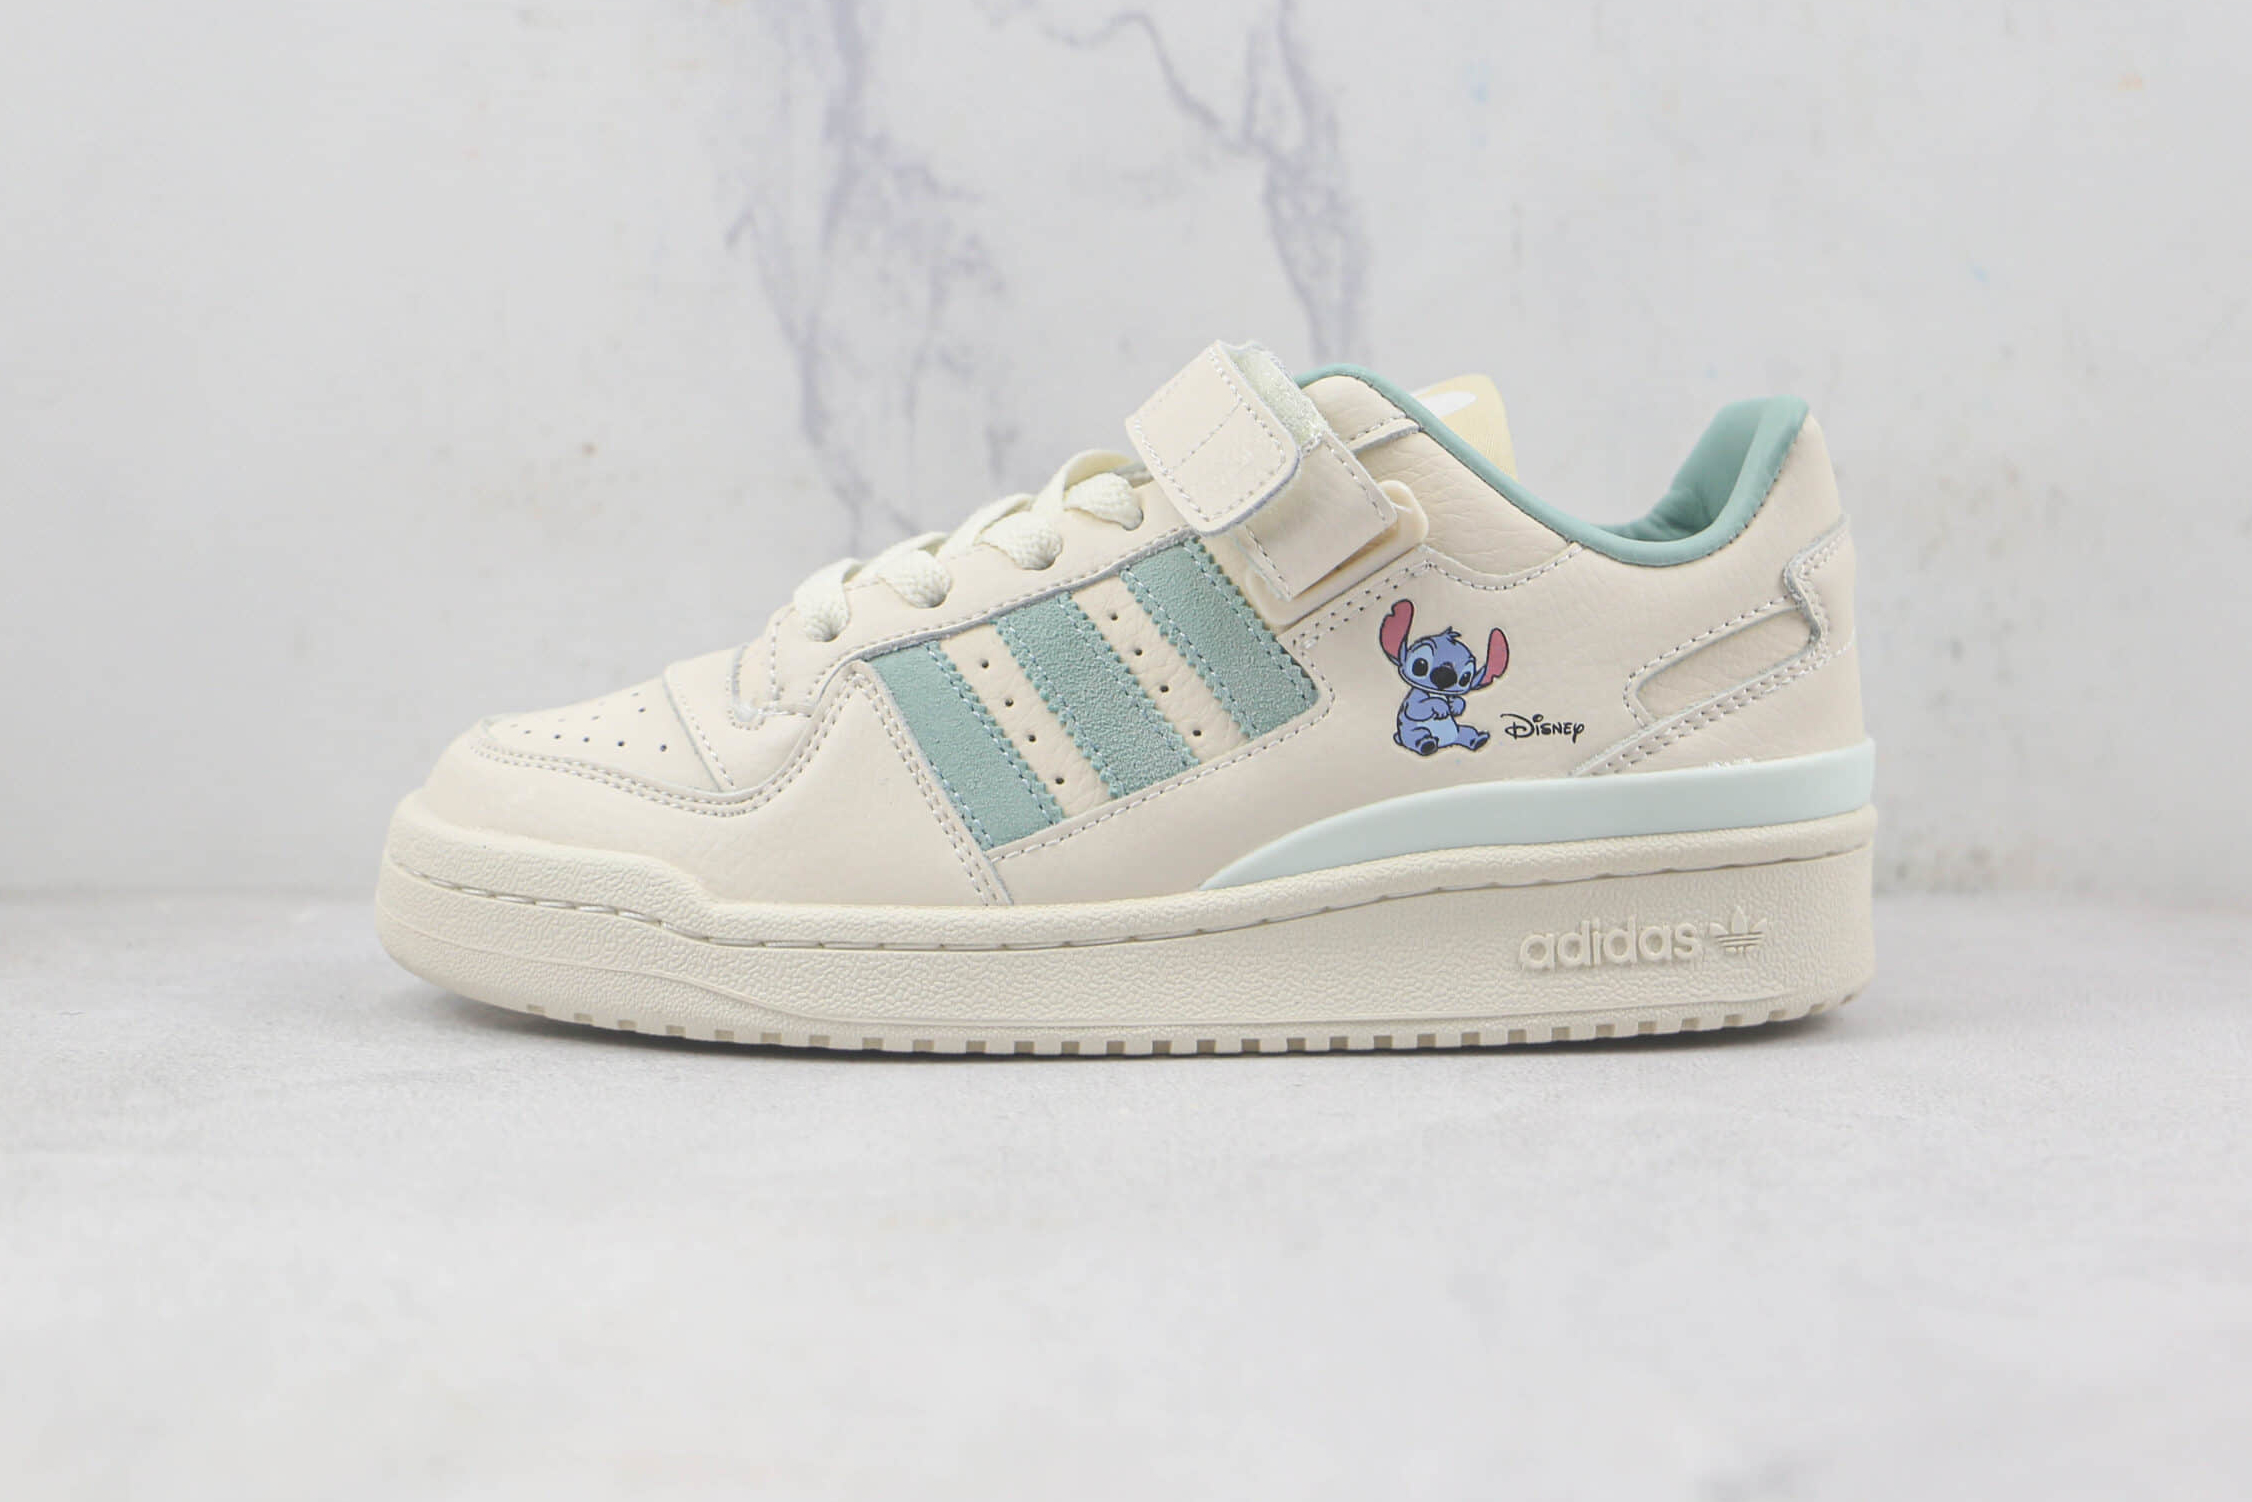 Disney x Adidas Originals Forum Low HQ6374 - Limited Edition Sneakers